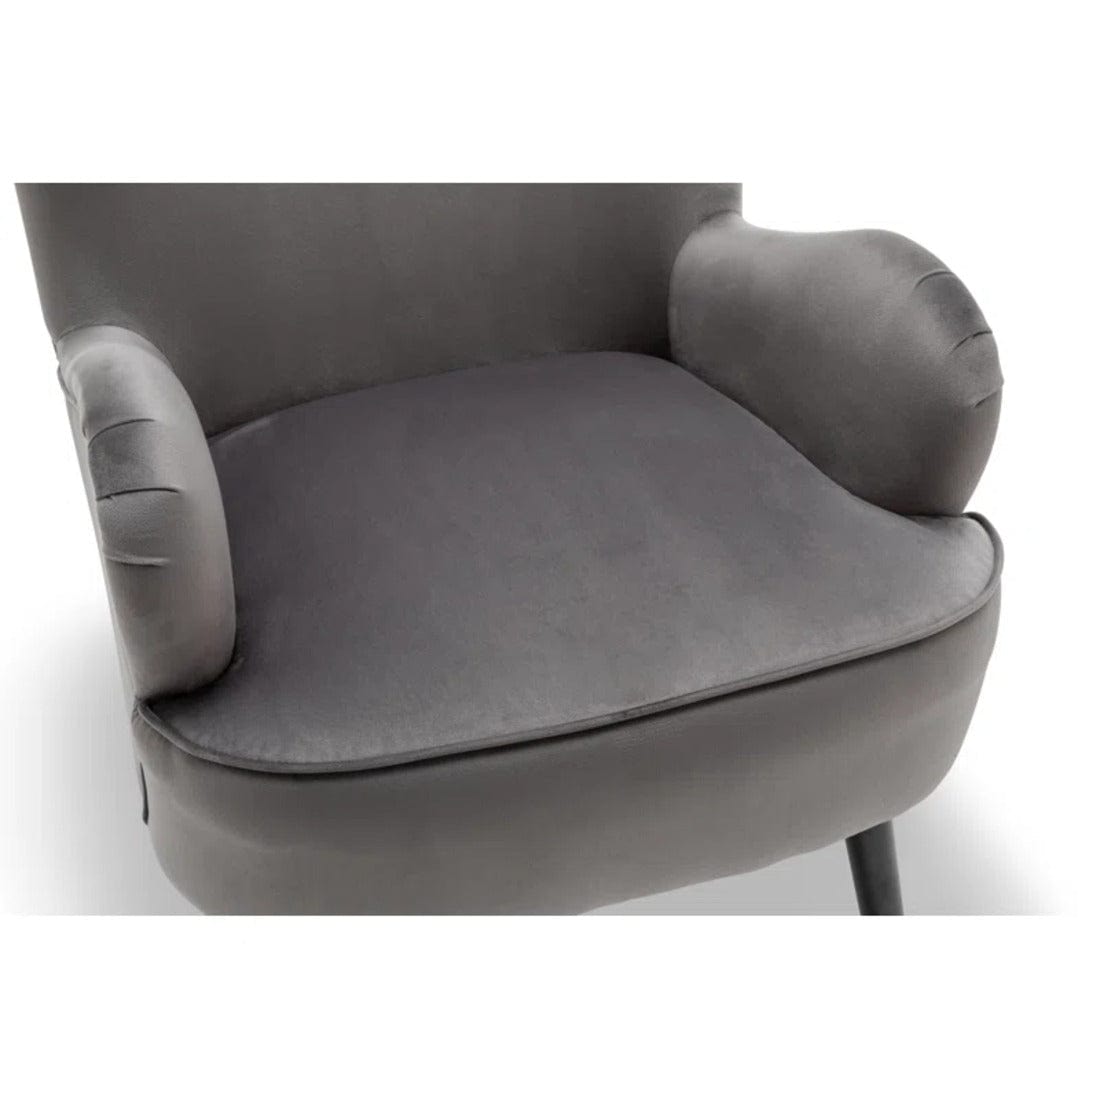 epperly chair with ottoman